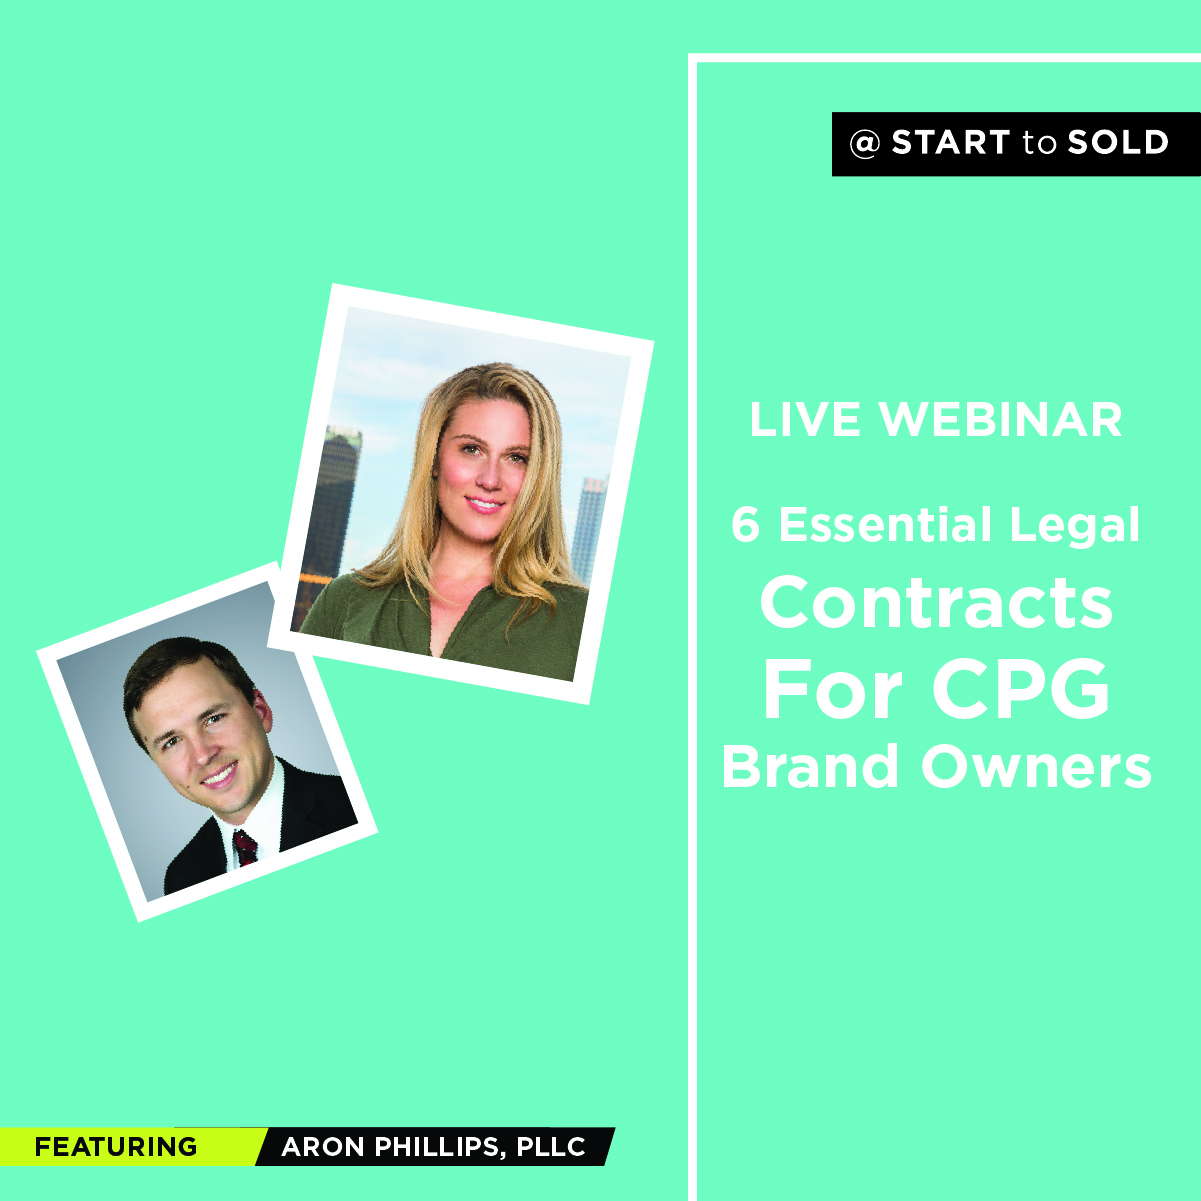 Contract Essentials For CPG Brand Owners - Product Small Business Legal Advice 101 (live webinar)